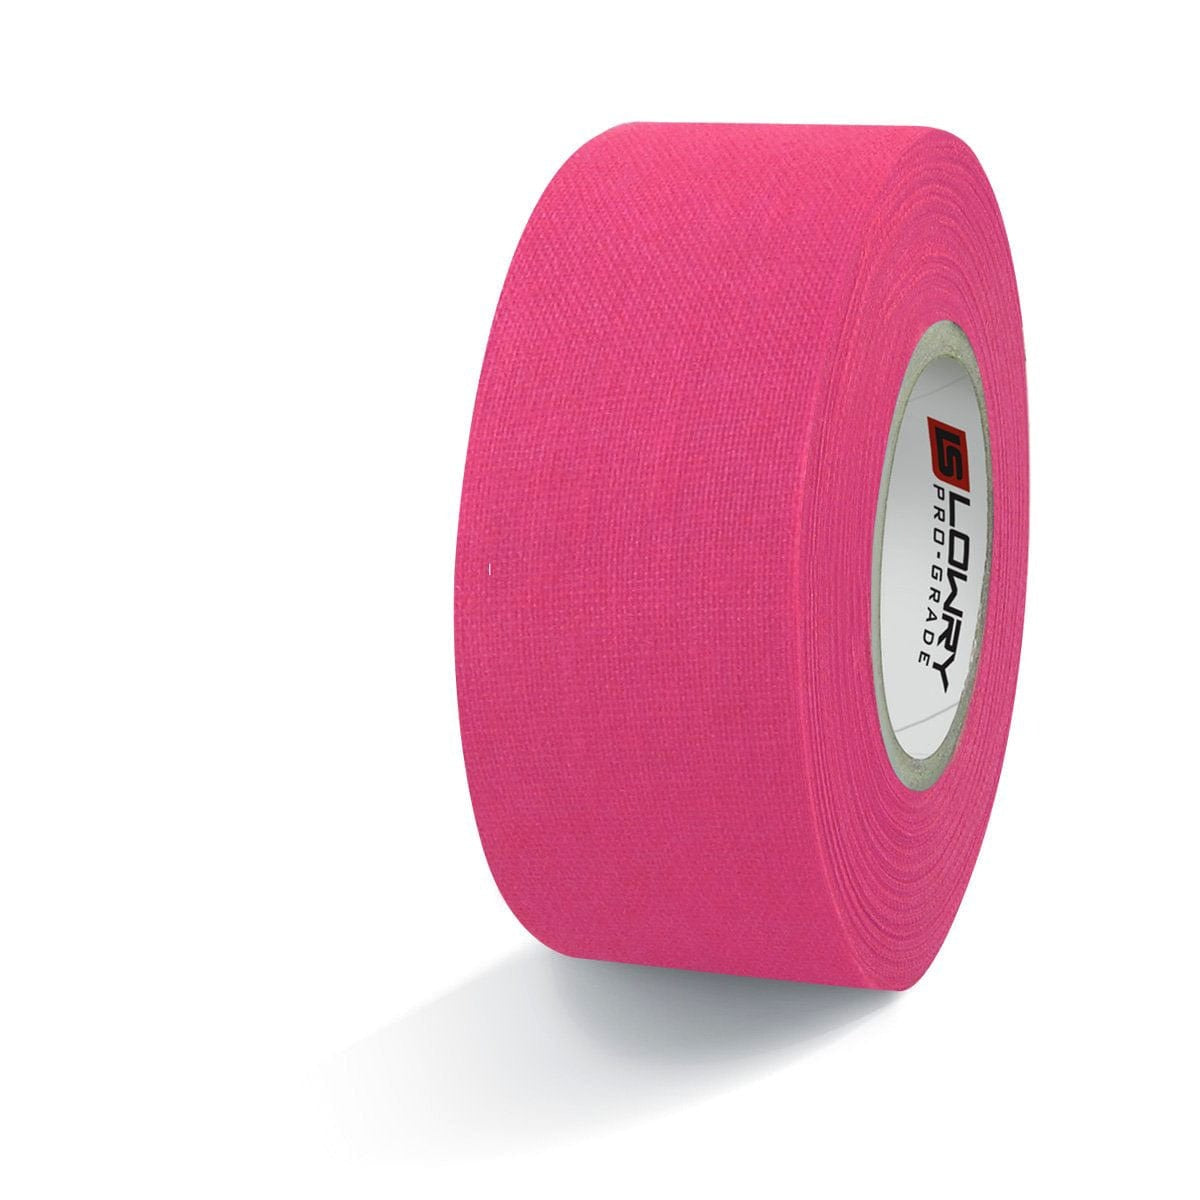 Lowry Sports Pro-Grade Colored Specialty Hockey Stick Tape